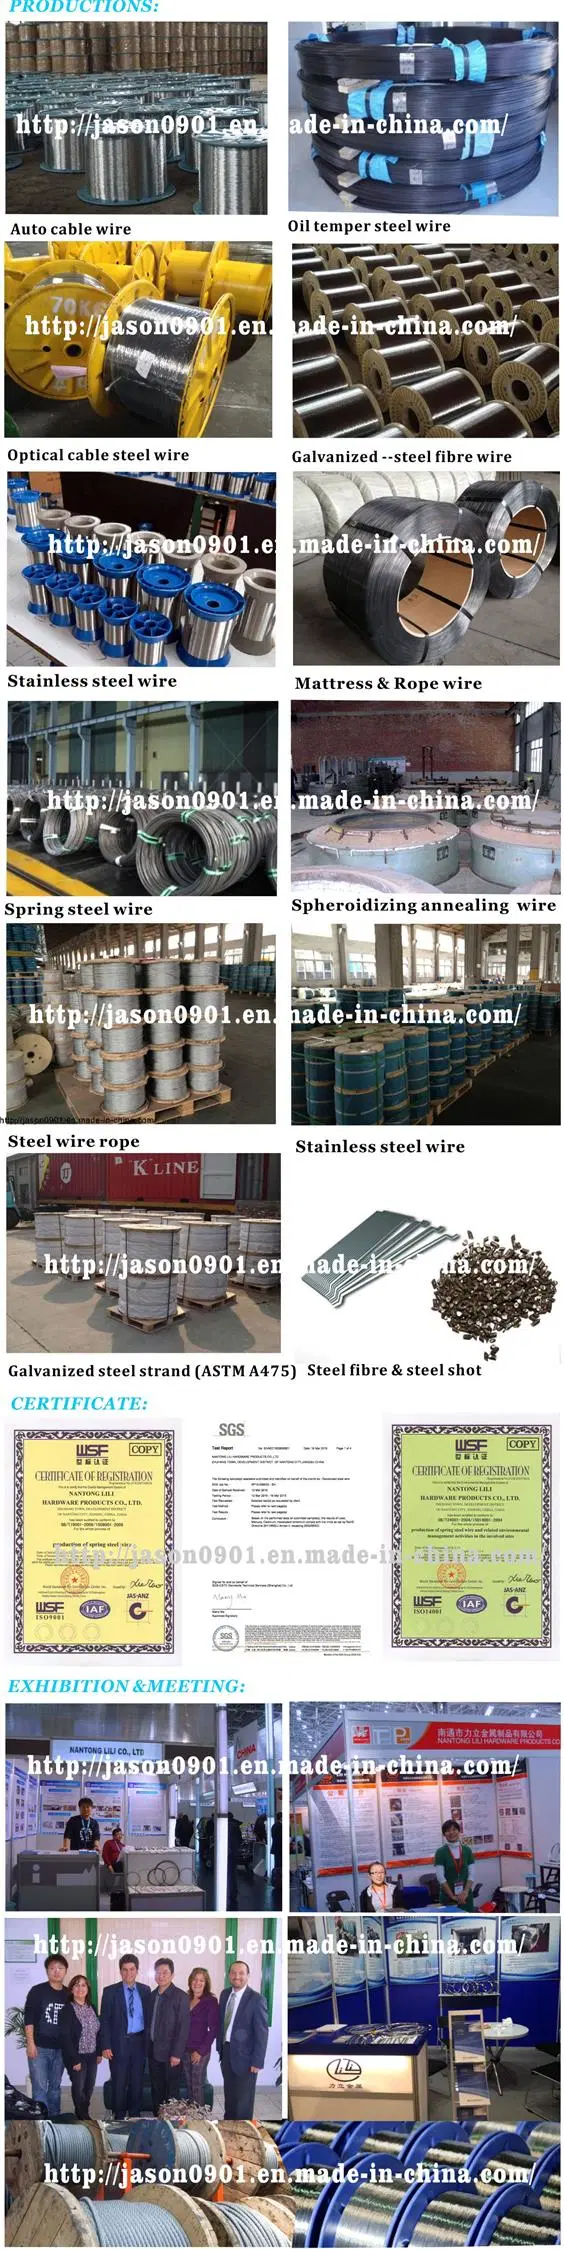 PVC Coated Stainless Steel Cable, Steel Wire, Wire Rope, Stainless Steel Wire